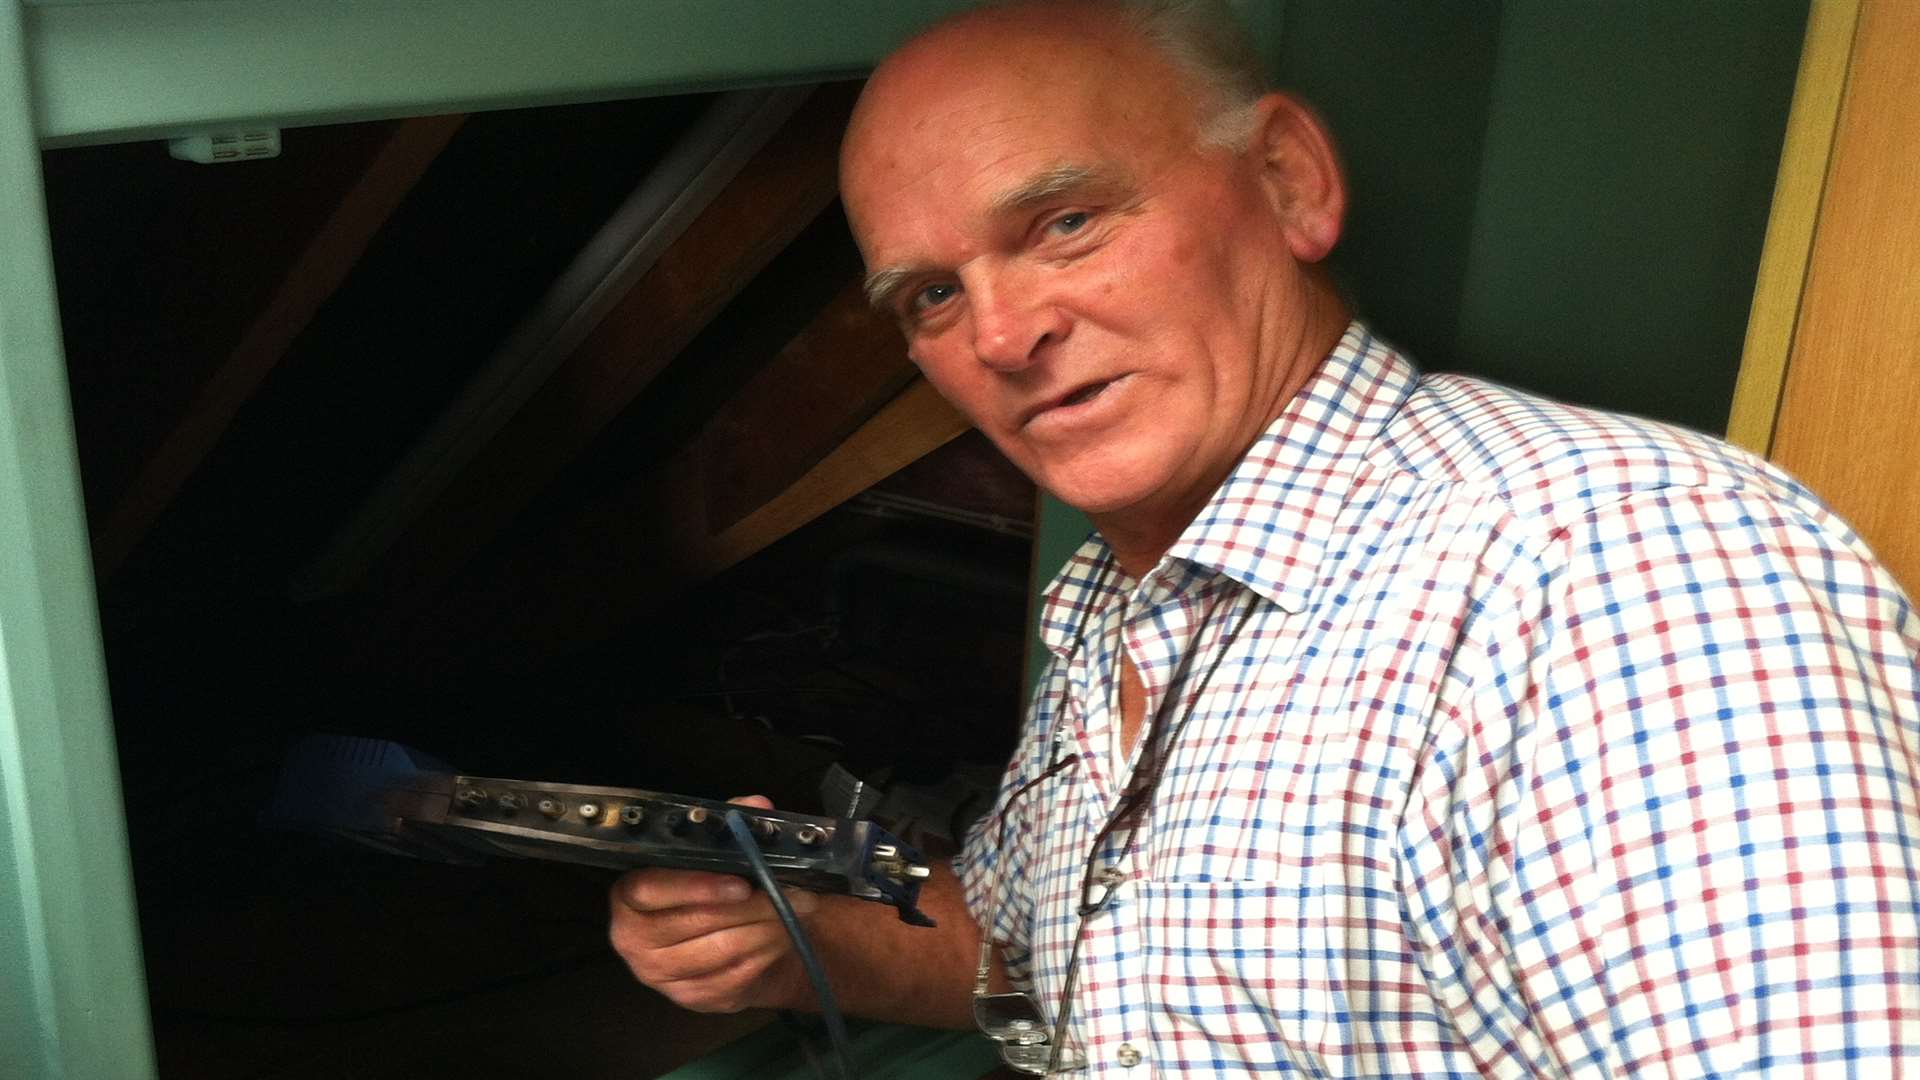 Tony Powell with damaged TV amplifier